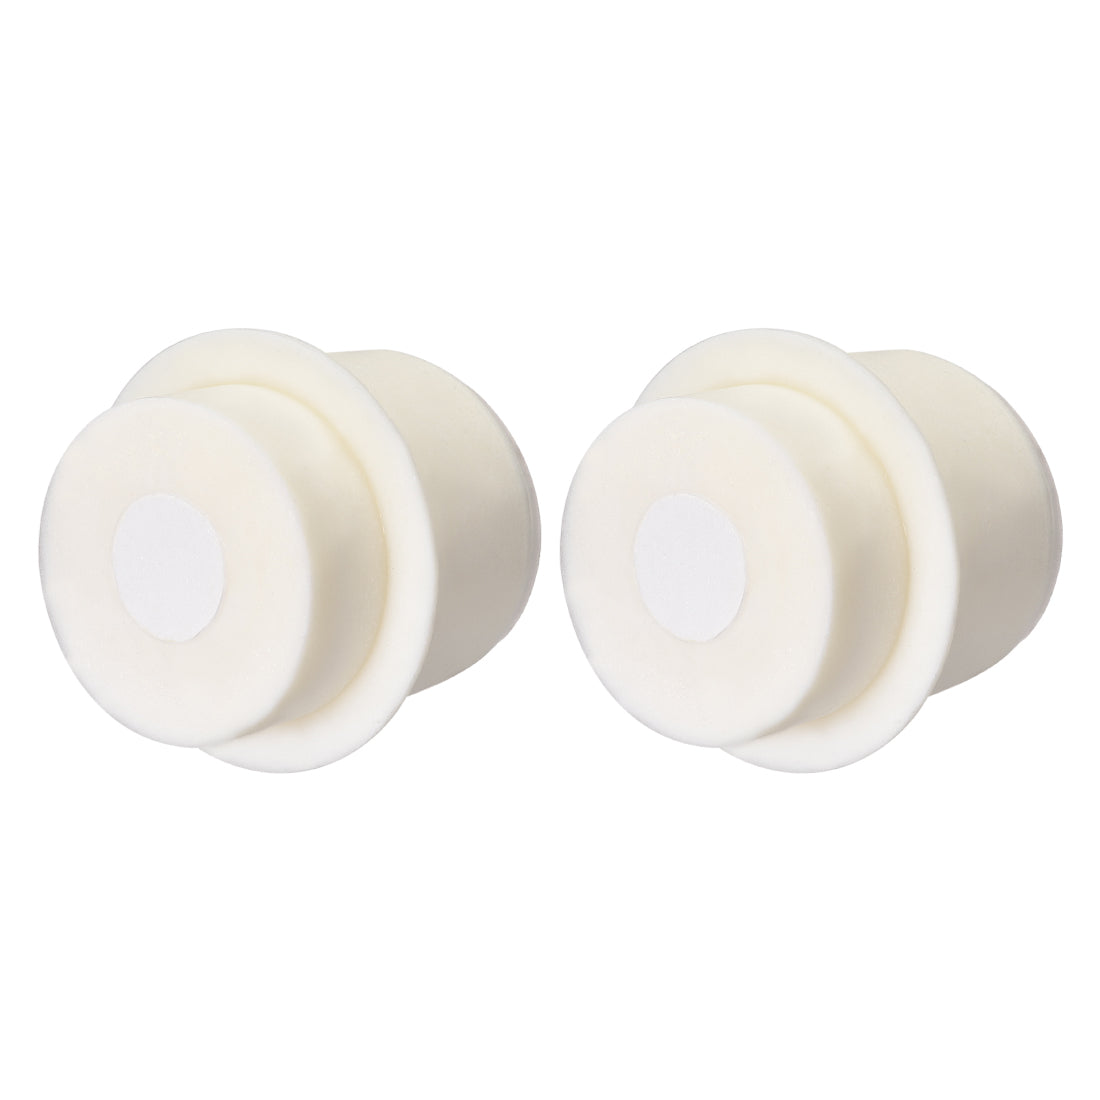 Uxcell Uxcell 37-41mm Beige Drilled Silicone Stopper Plugs for Flask Test Tube Stopper 2pcs